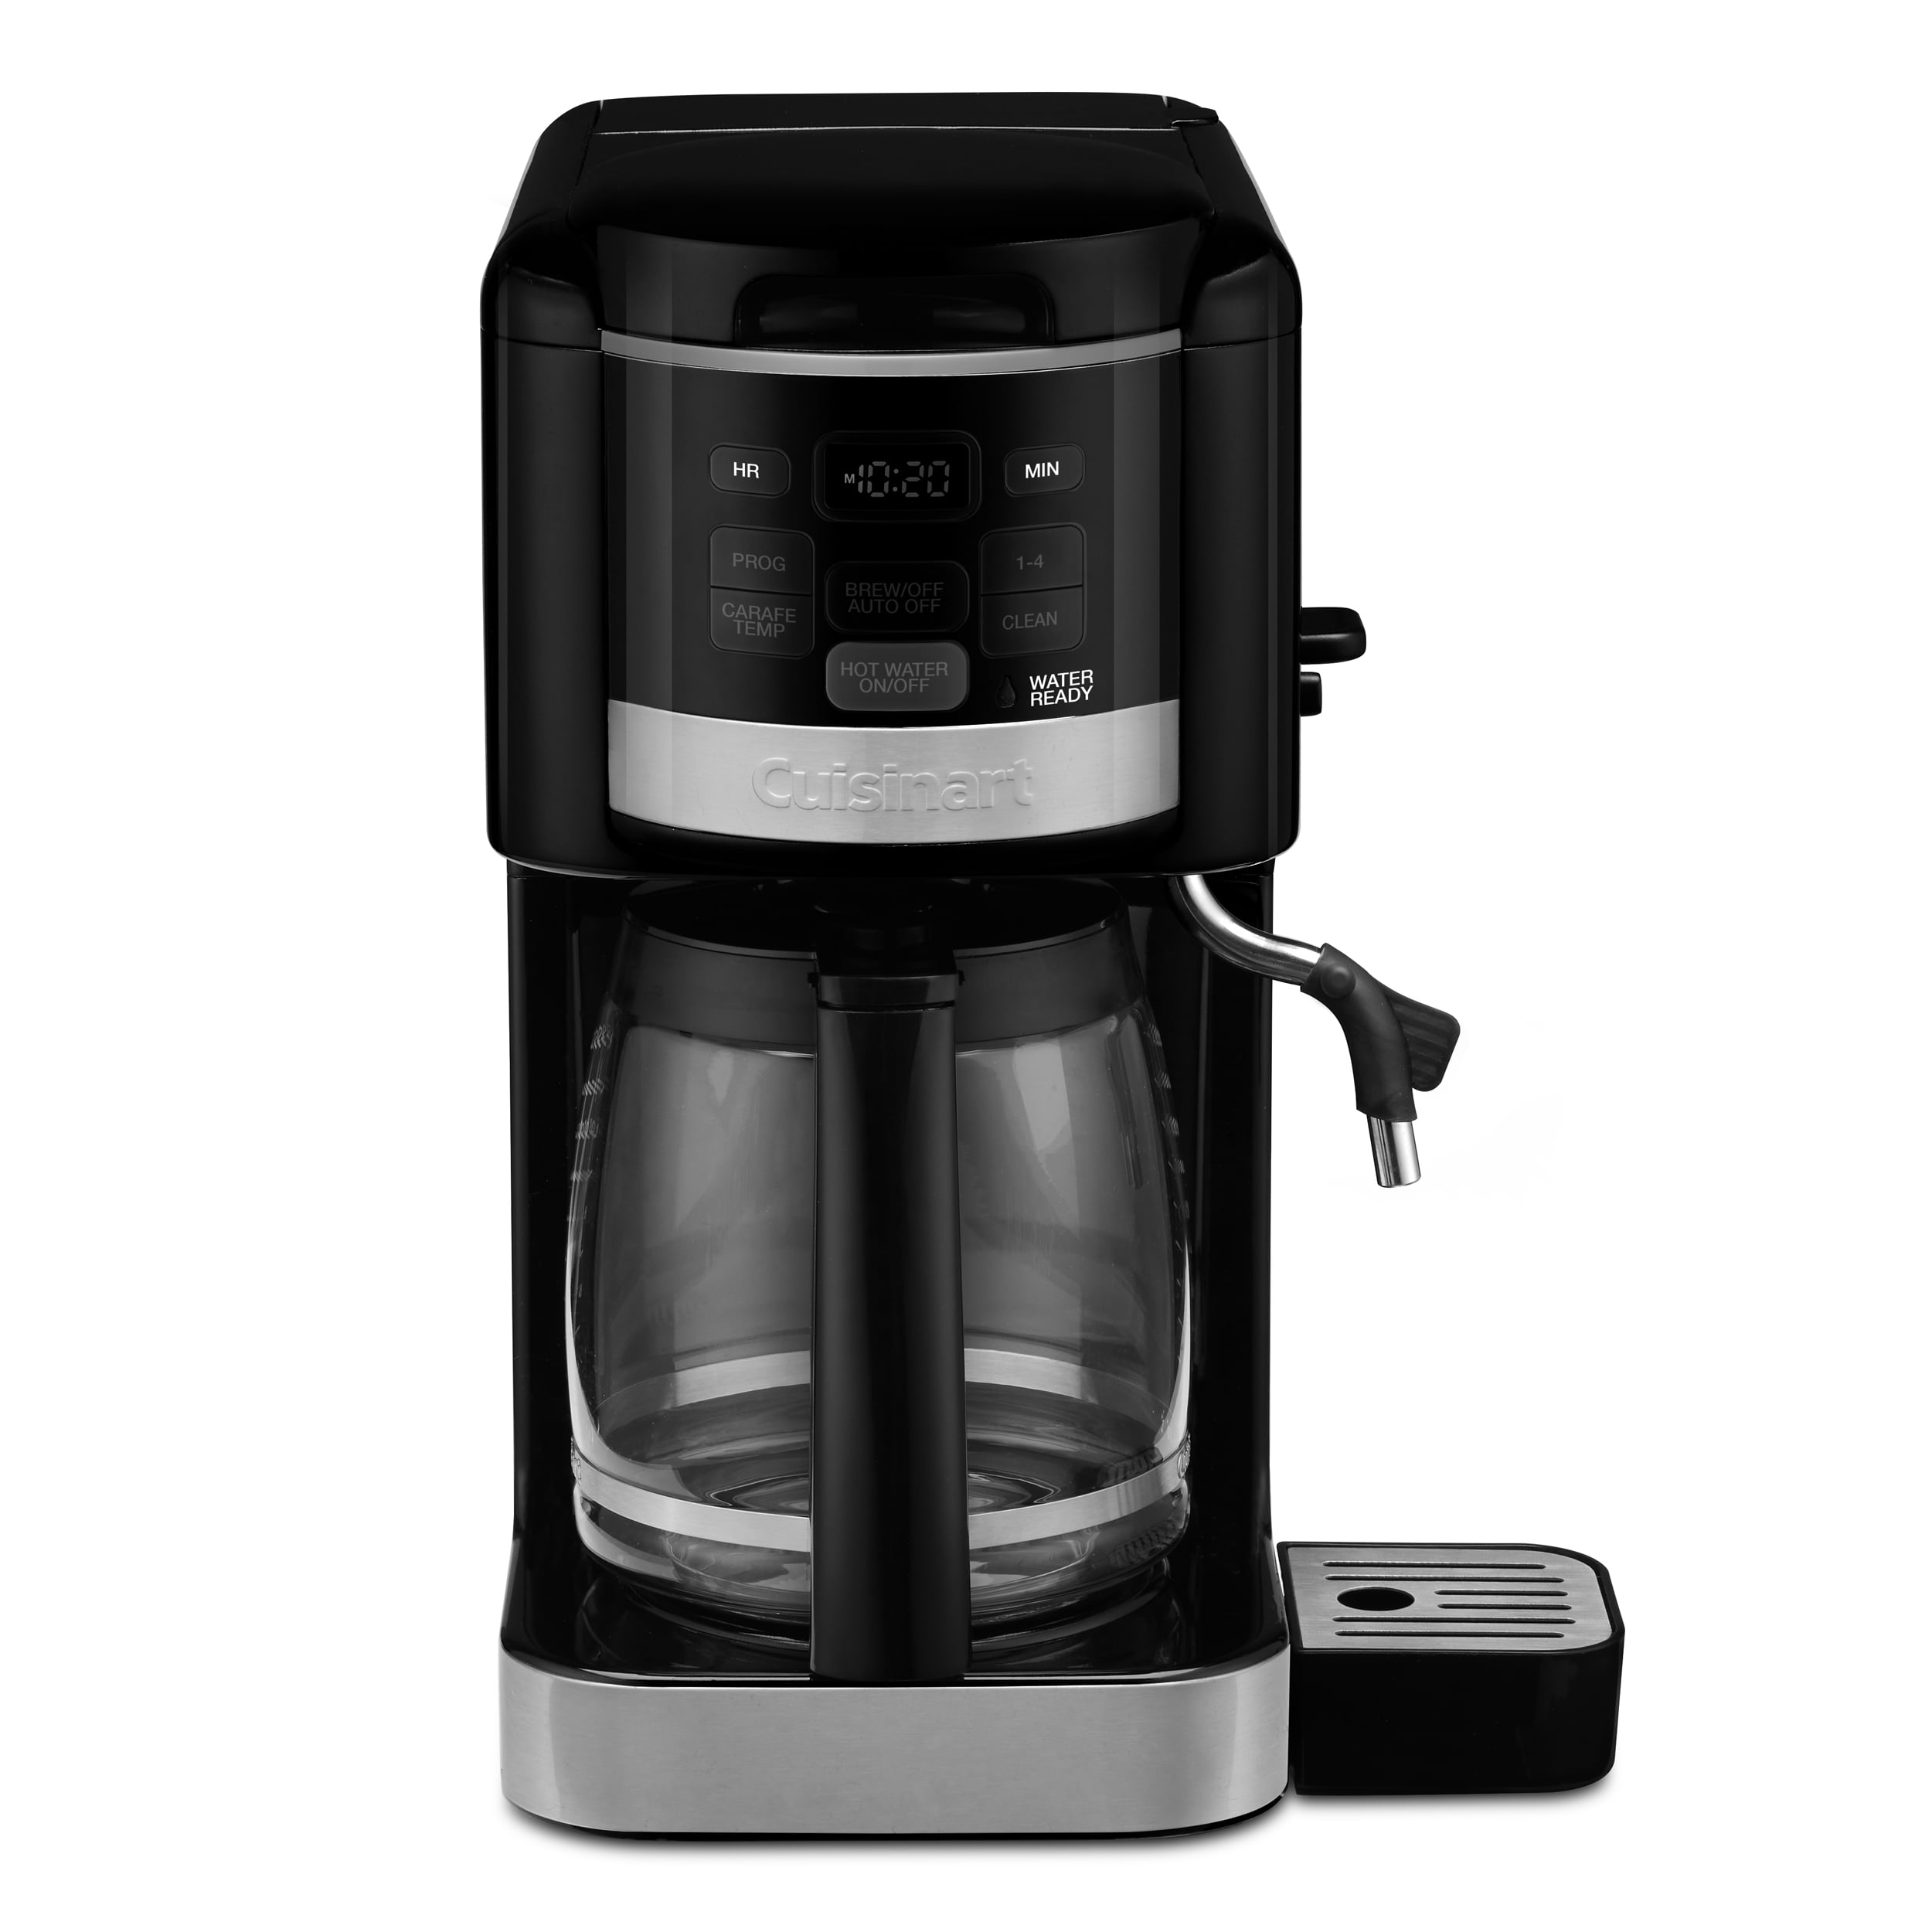 Ninja DualBrew Pro Specialty Coffee Maker Review: almost all-in-one  perfection